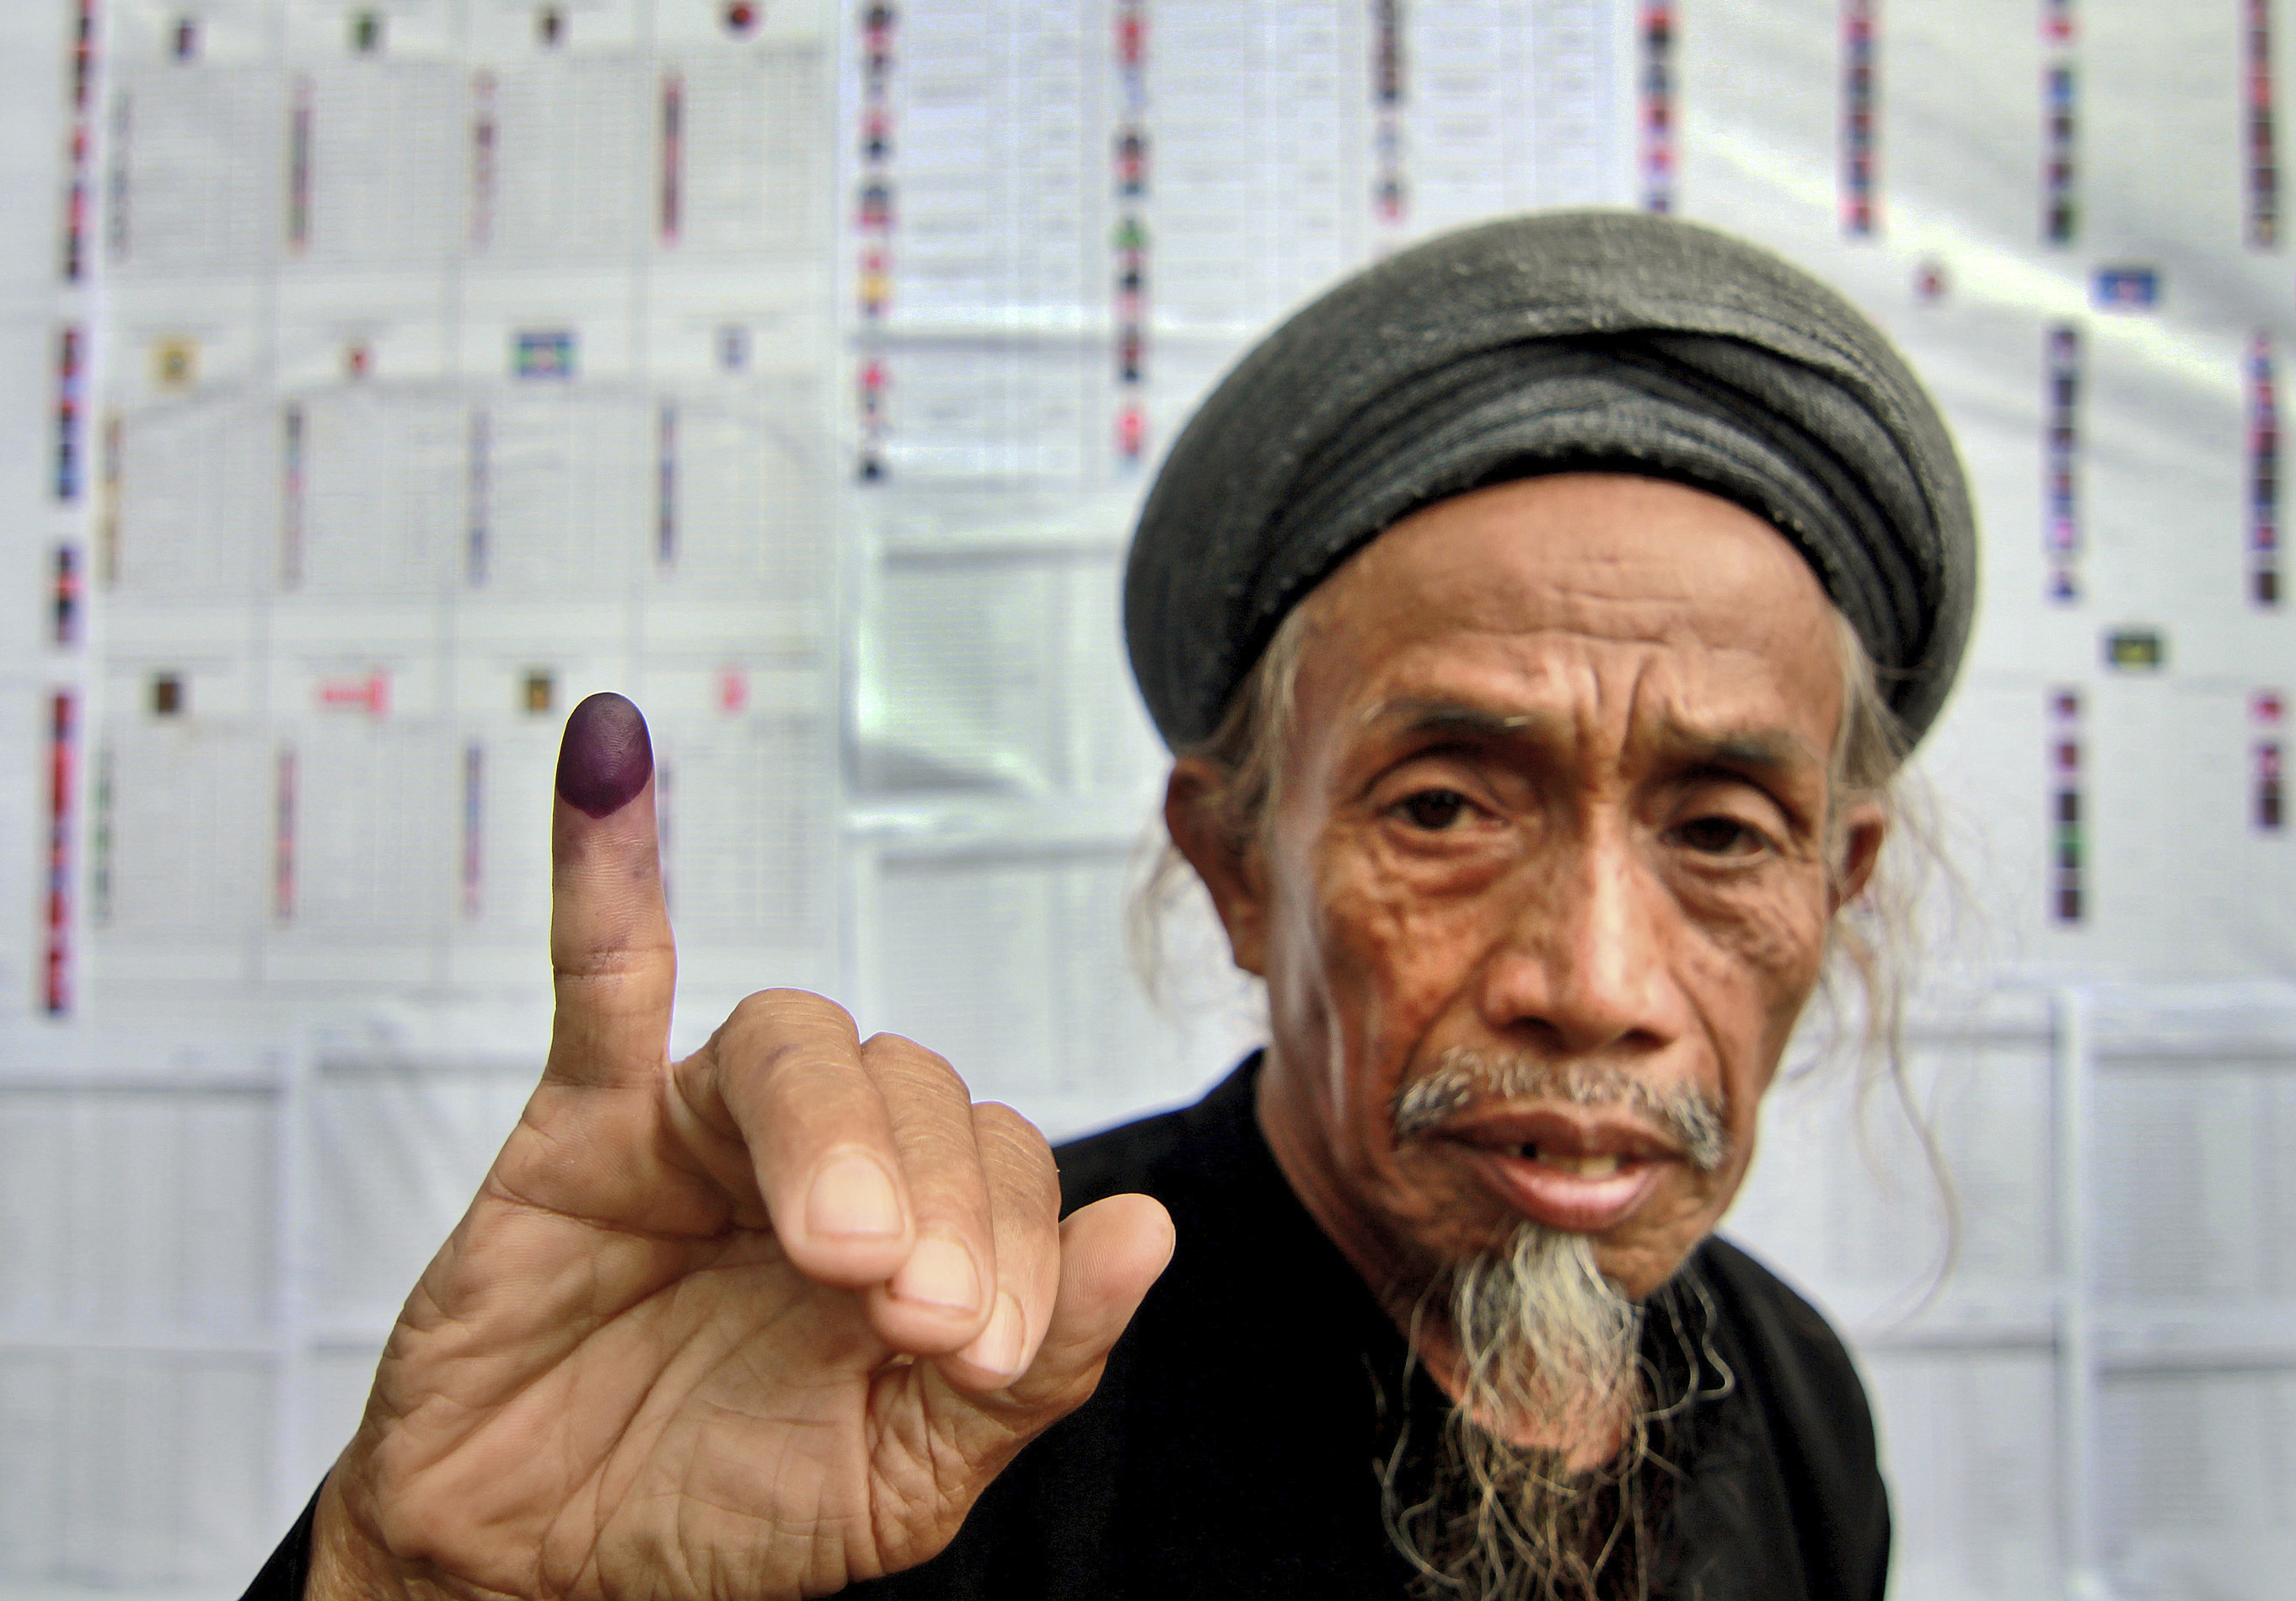 A member of the An-Nadzir Muslim sect shows his inked finger after casting his ballot at a polling station during the Indonesian parliamentary elections in Gowa, South Sulawesi province, on April 9, 2014 (Masyudi S. Firmansyah—AP)